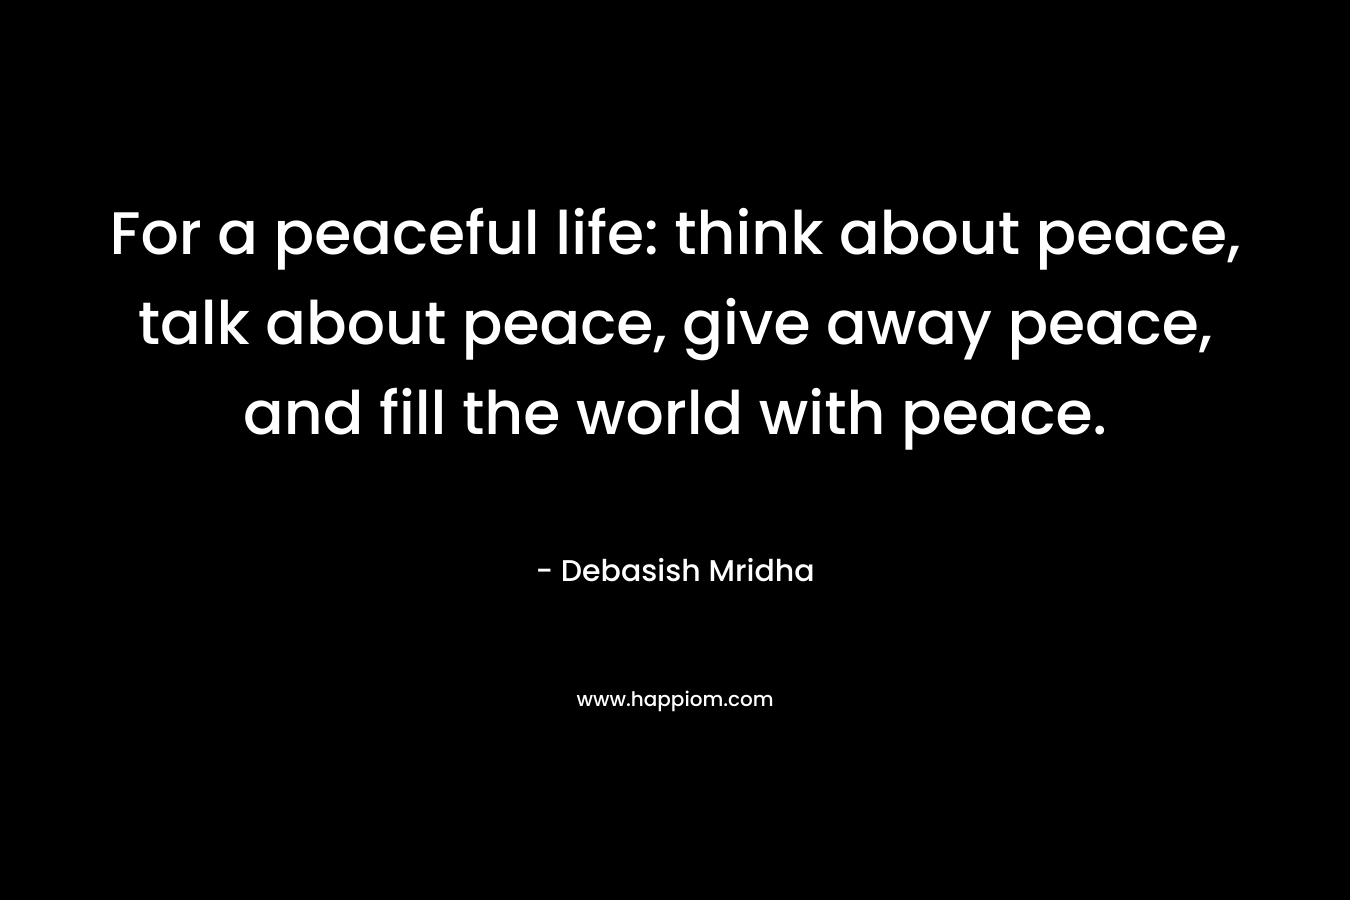 For a peaceful life: think about peace, talk about peace, give away peace, and fill the world with peace.